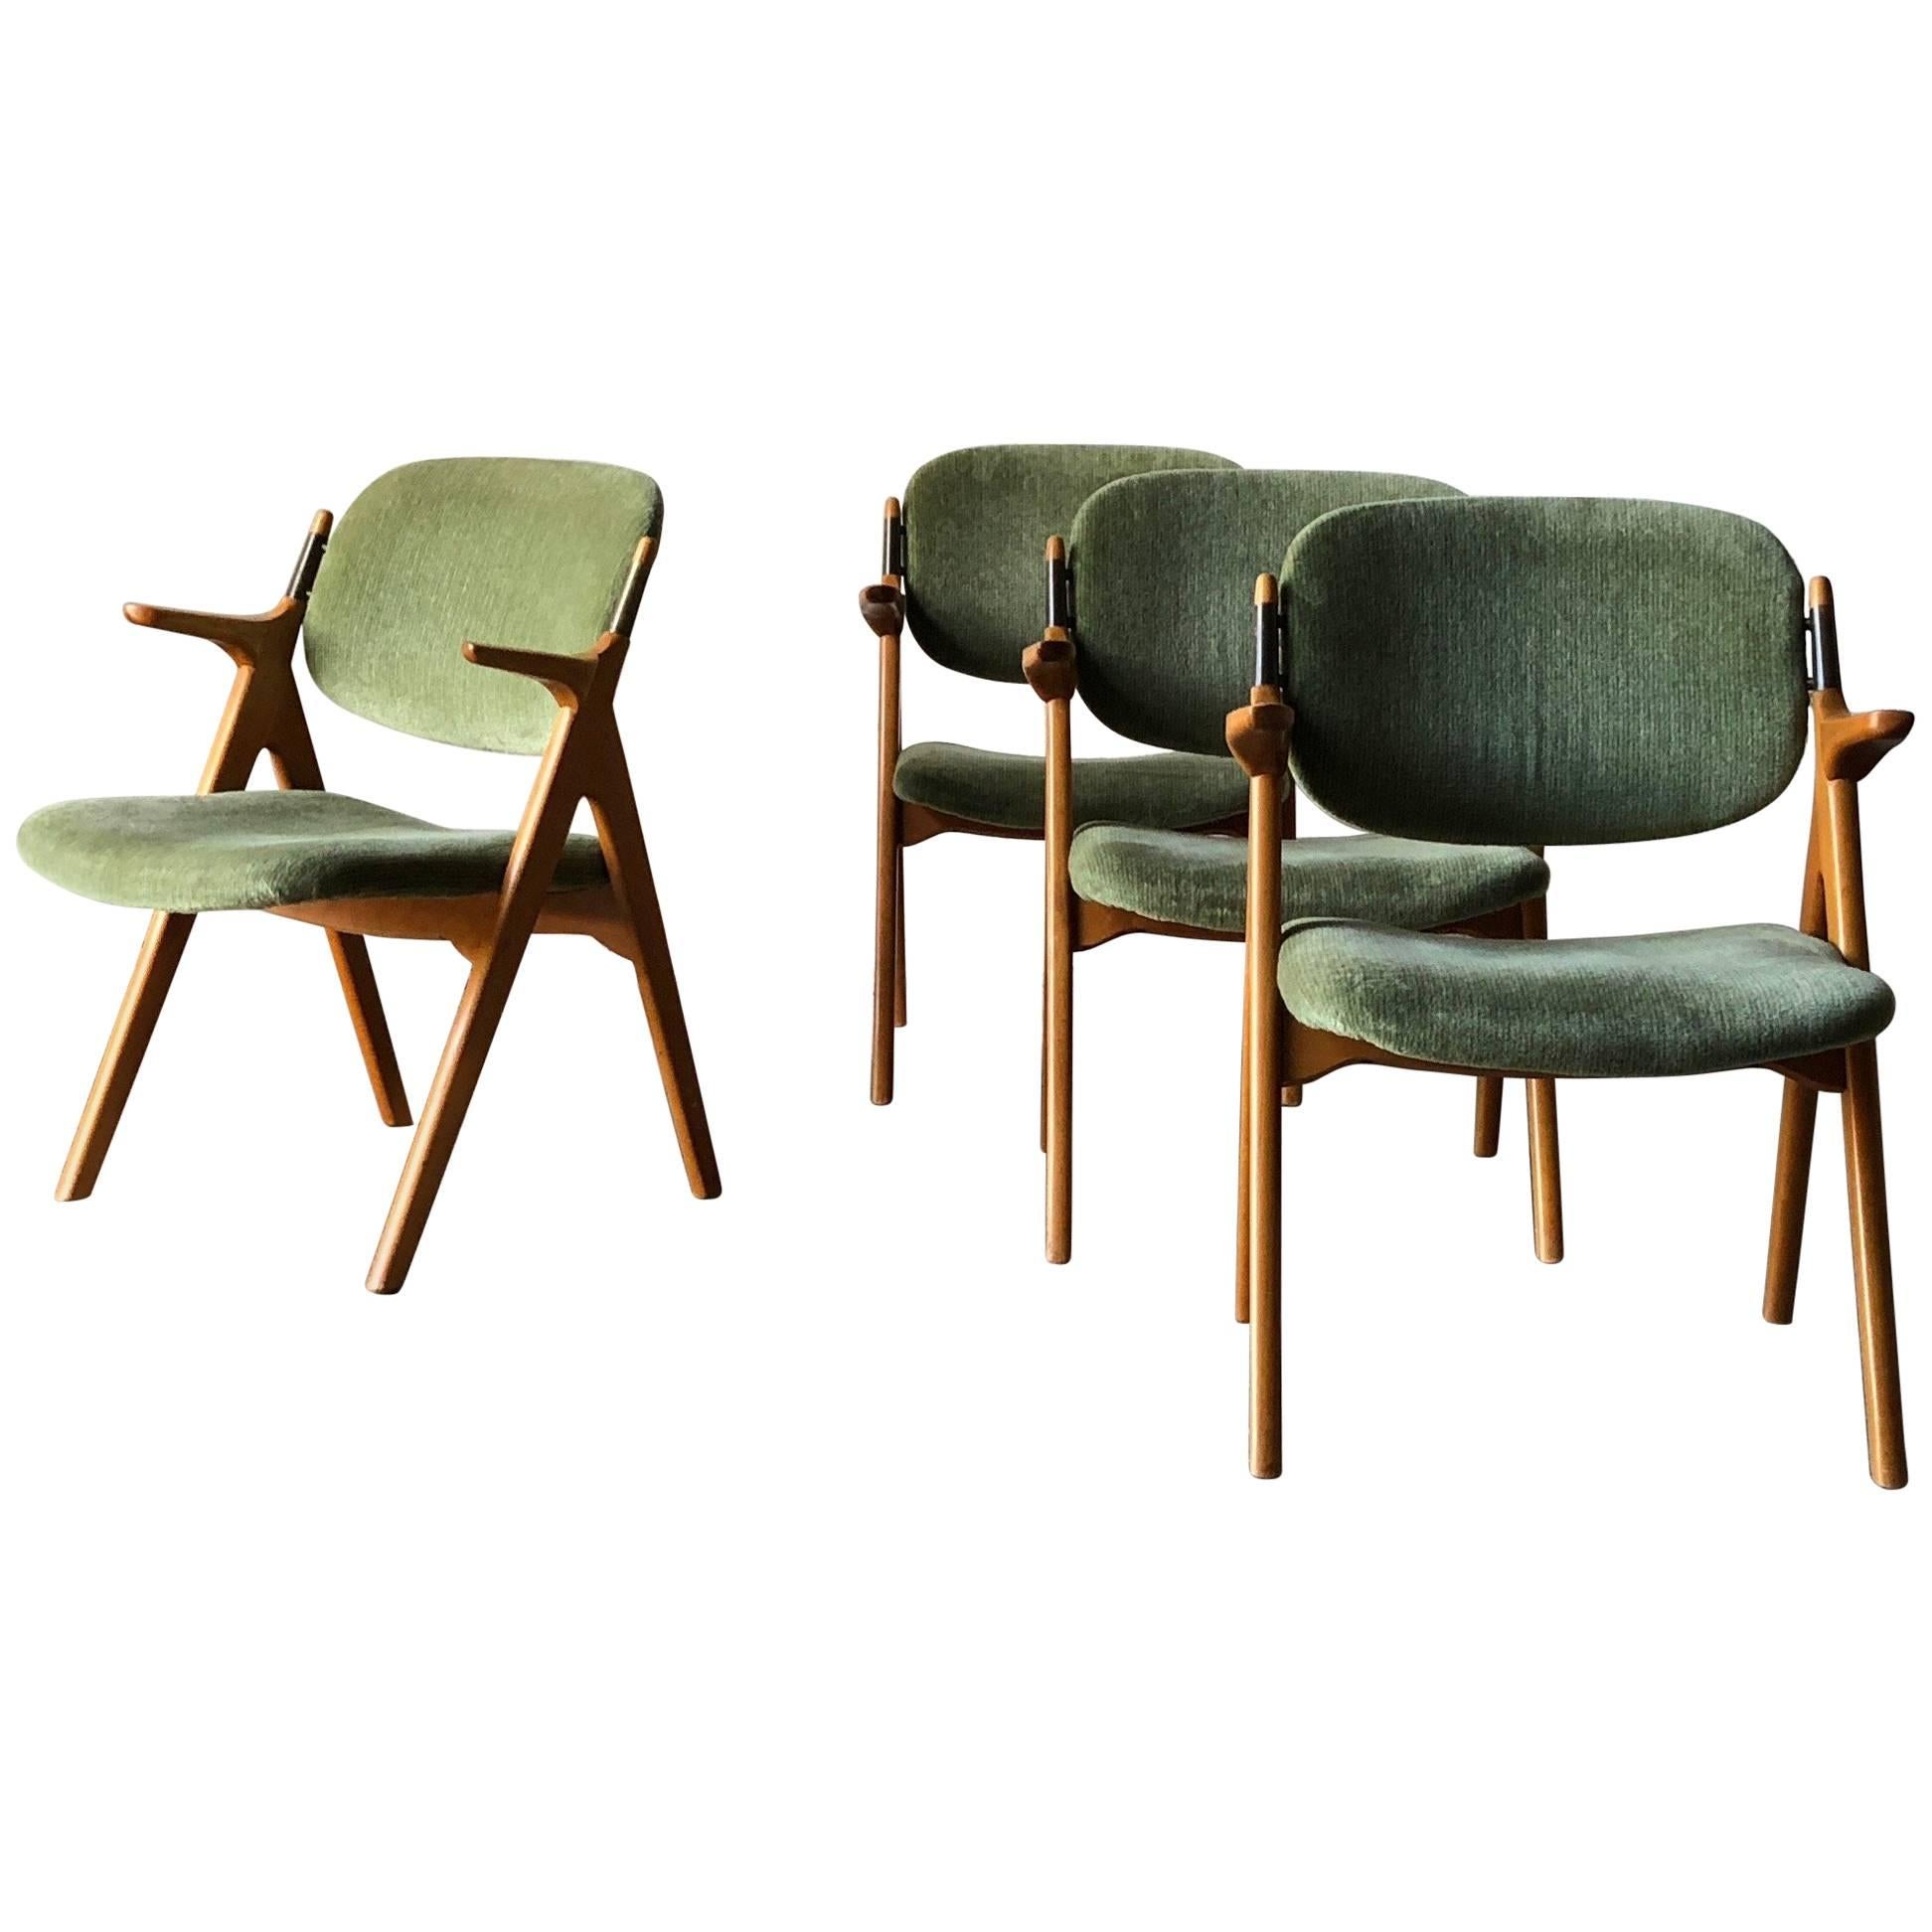 Scandinavian Modern Armchairs in Birch with Original Upholstery 1950s Vintage For Sale